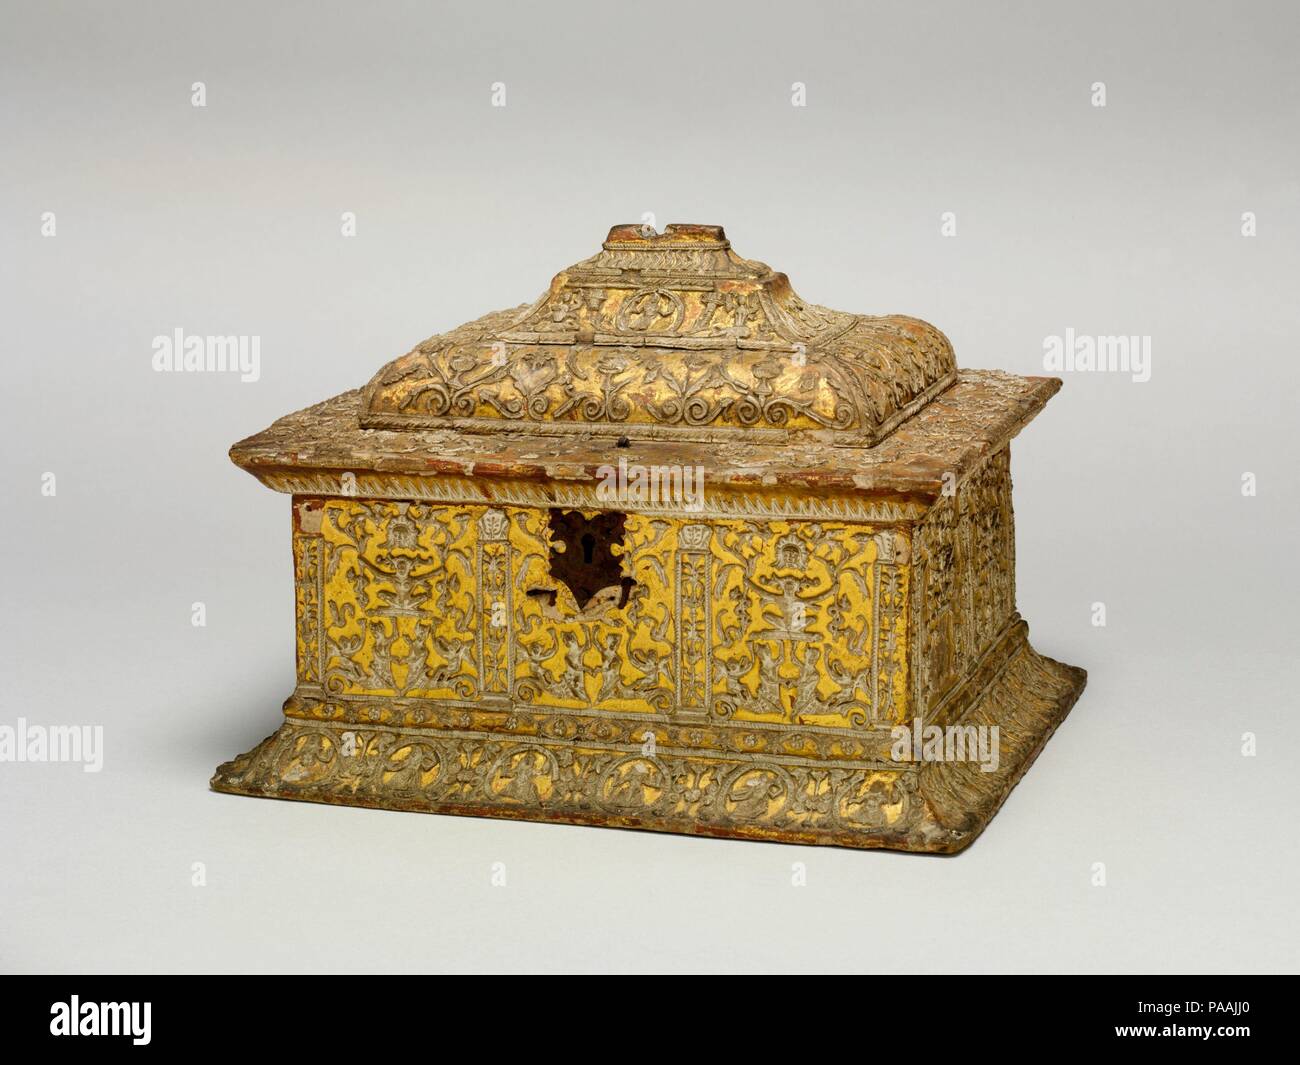 Casket (cassetta). Culture: Italian, Ferrara. Dimensions: Overall: 7 1/4 × 8 1/2 × 10 1/4 in. (18.4 × 21.6 × 26 cm). Date: late 15th-early 16th century.  The variety of fantastic ornament employed for the decoration of this casket was derived from Roman wall decoration. After centuries of burial, these decorations were revealed during the excavations of the Golden house of Nero in Rome, begun about 1480. As they were found underground in grotto-like spaces, they were named grottesche, or grotesques. Museum: Metropolitan Museum of Art, New York, USA. Stock Photo